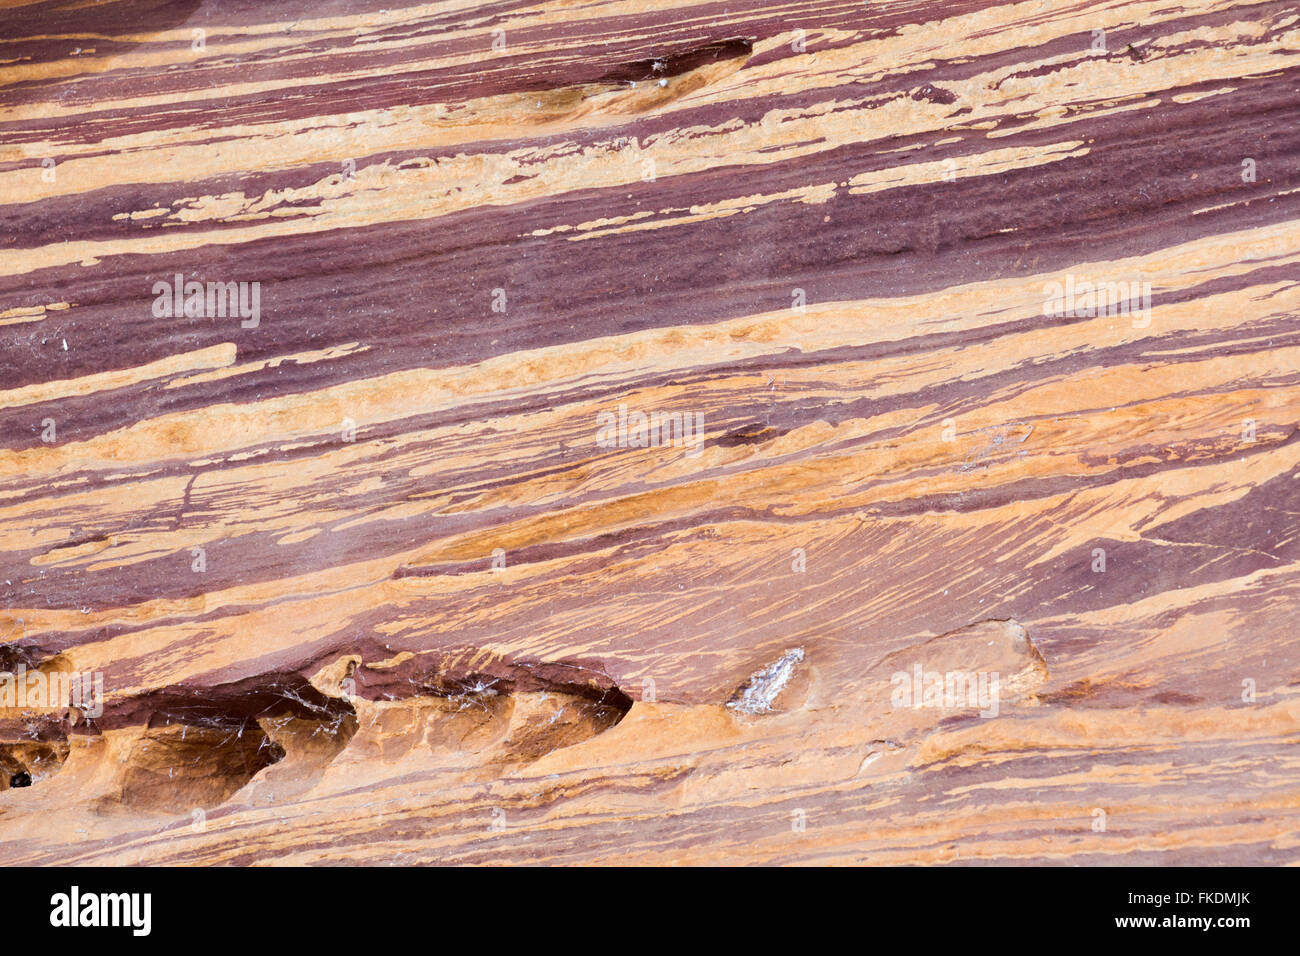 Layers of rock in the Murchison River Gorge at Ross Graham, Kalbarri National Park, Western Australia Stock Photo